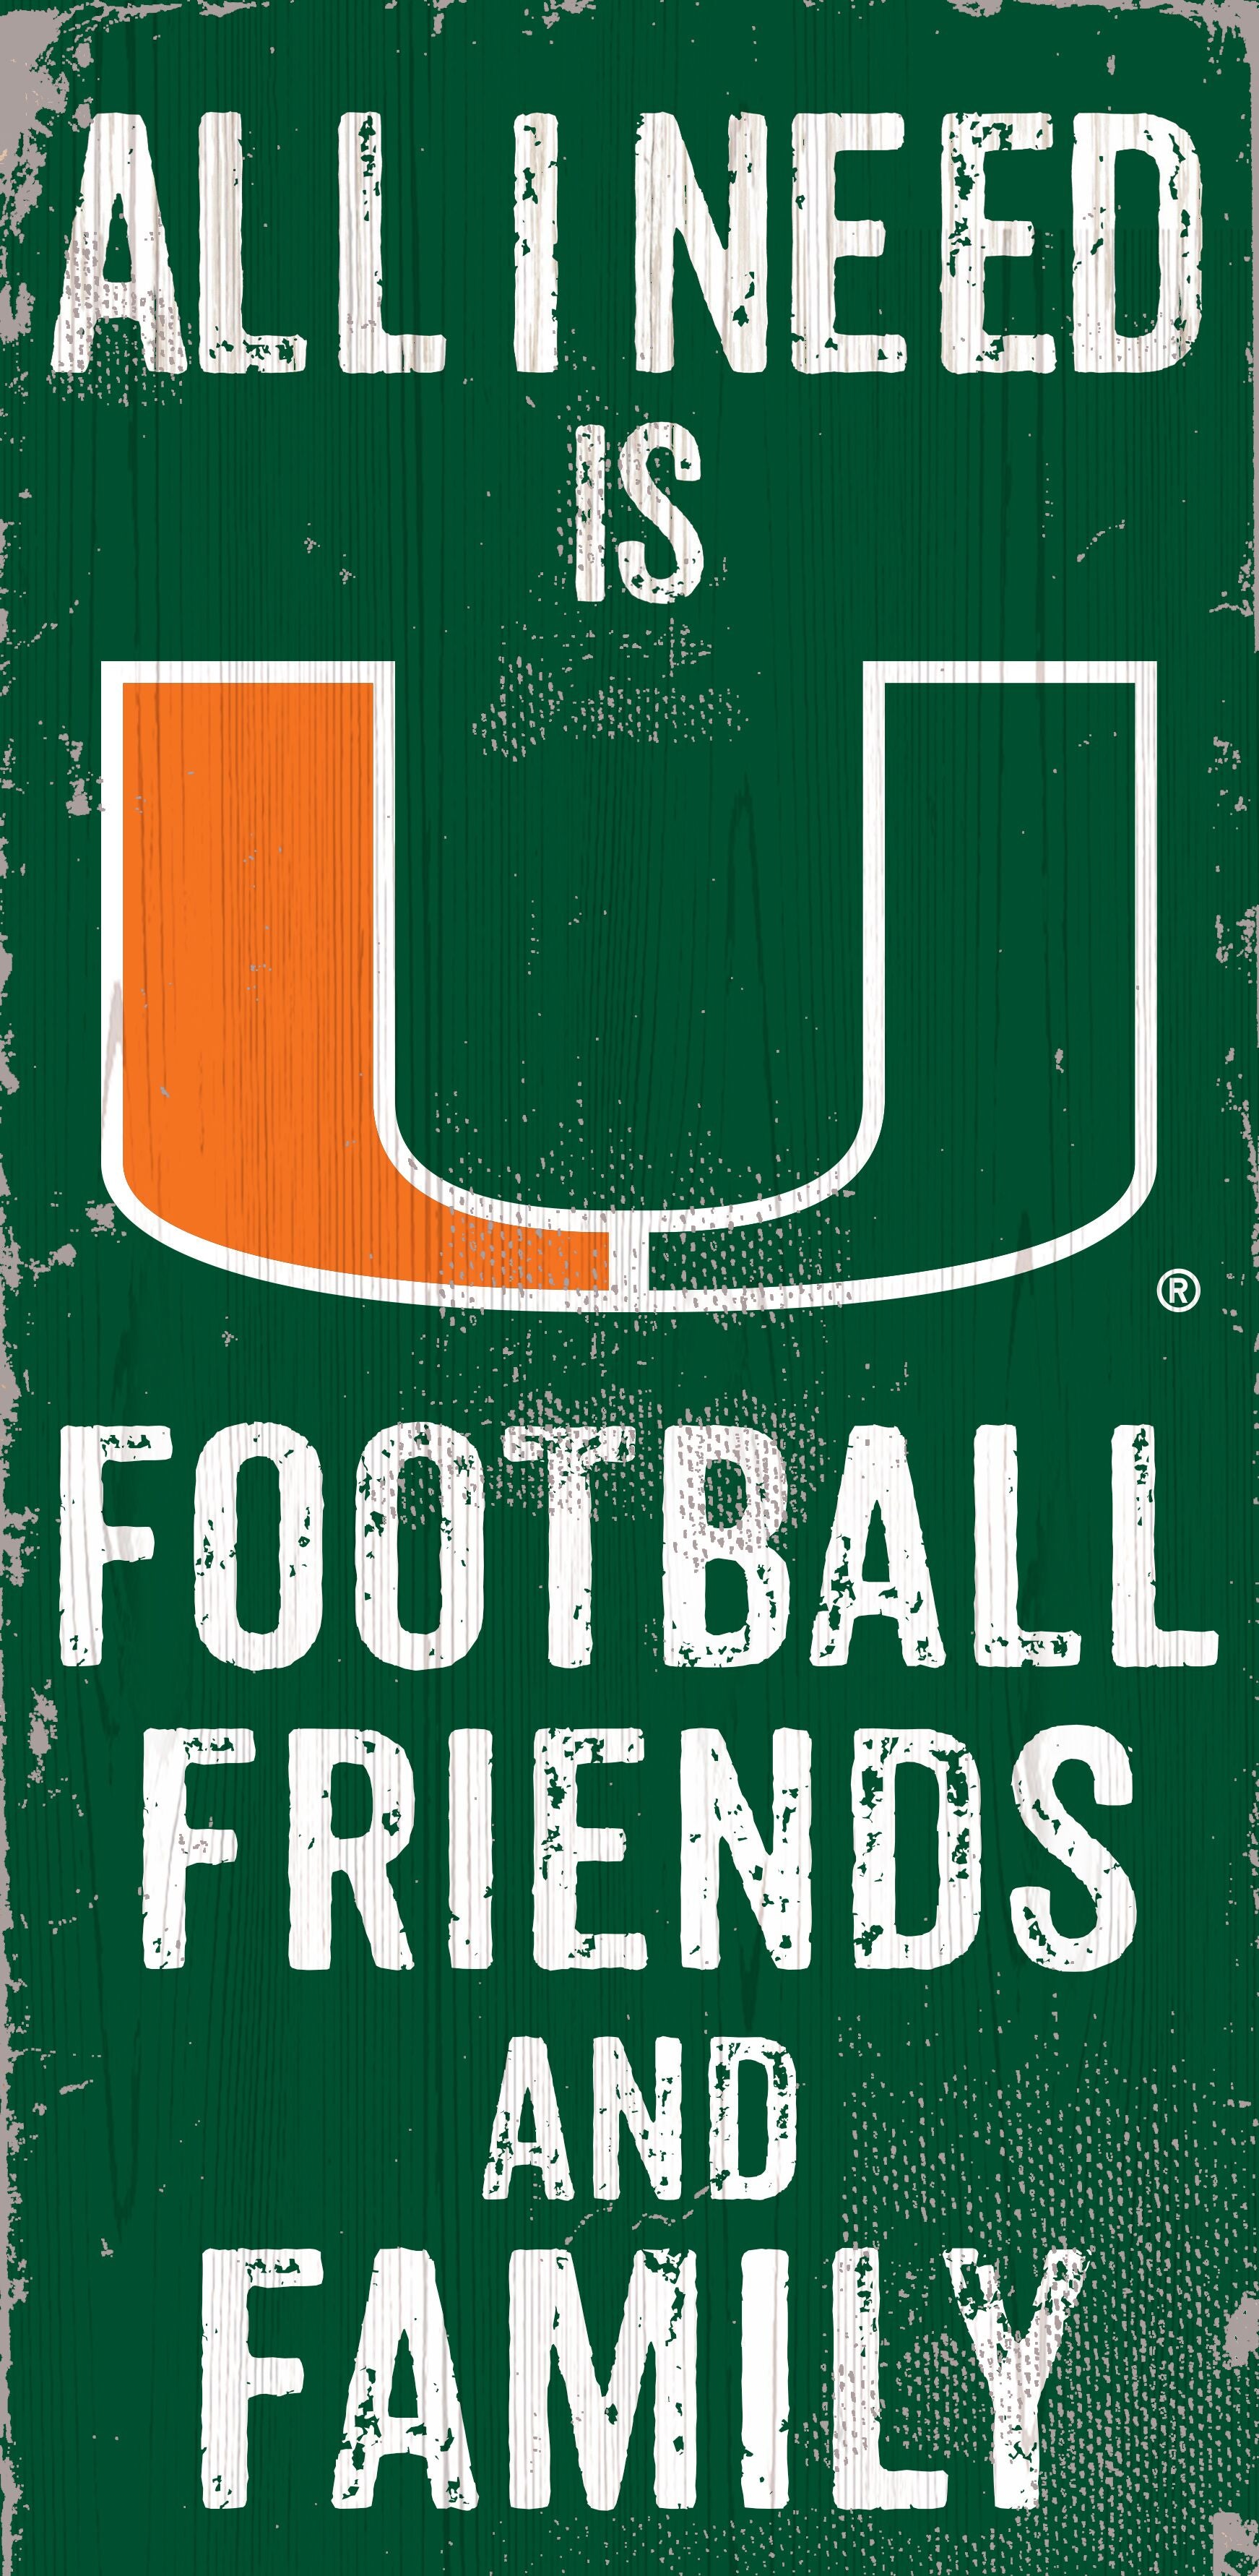 Miami Hurricanes Football, Friends, & Family Wooden Sign - 6 x 12"